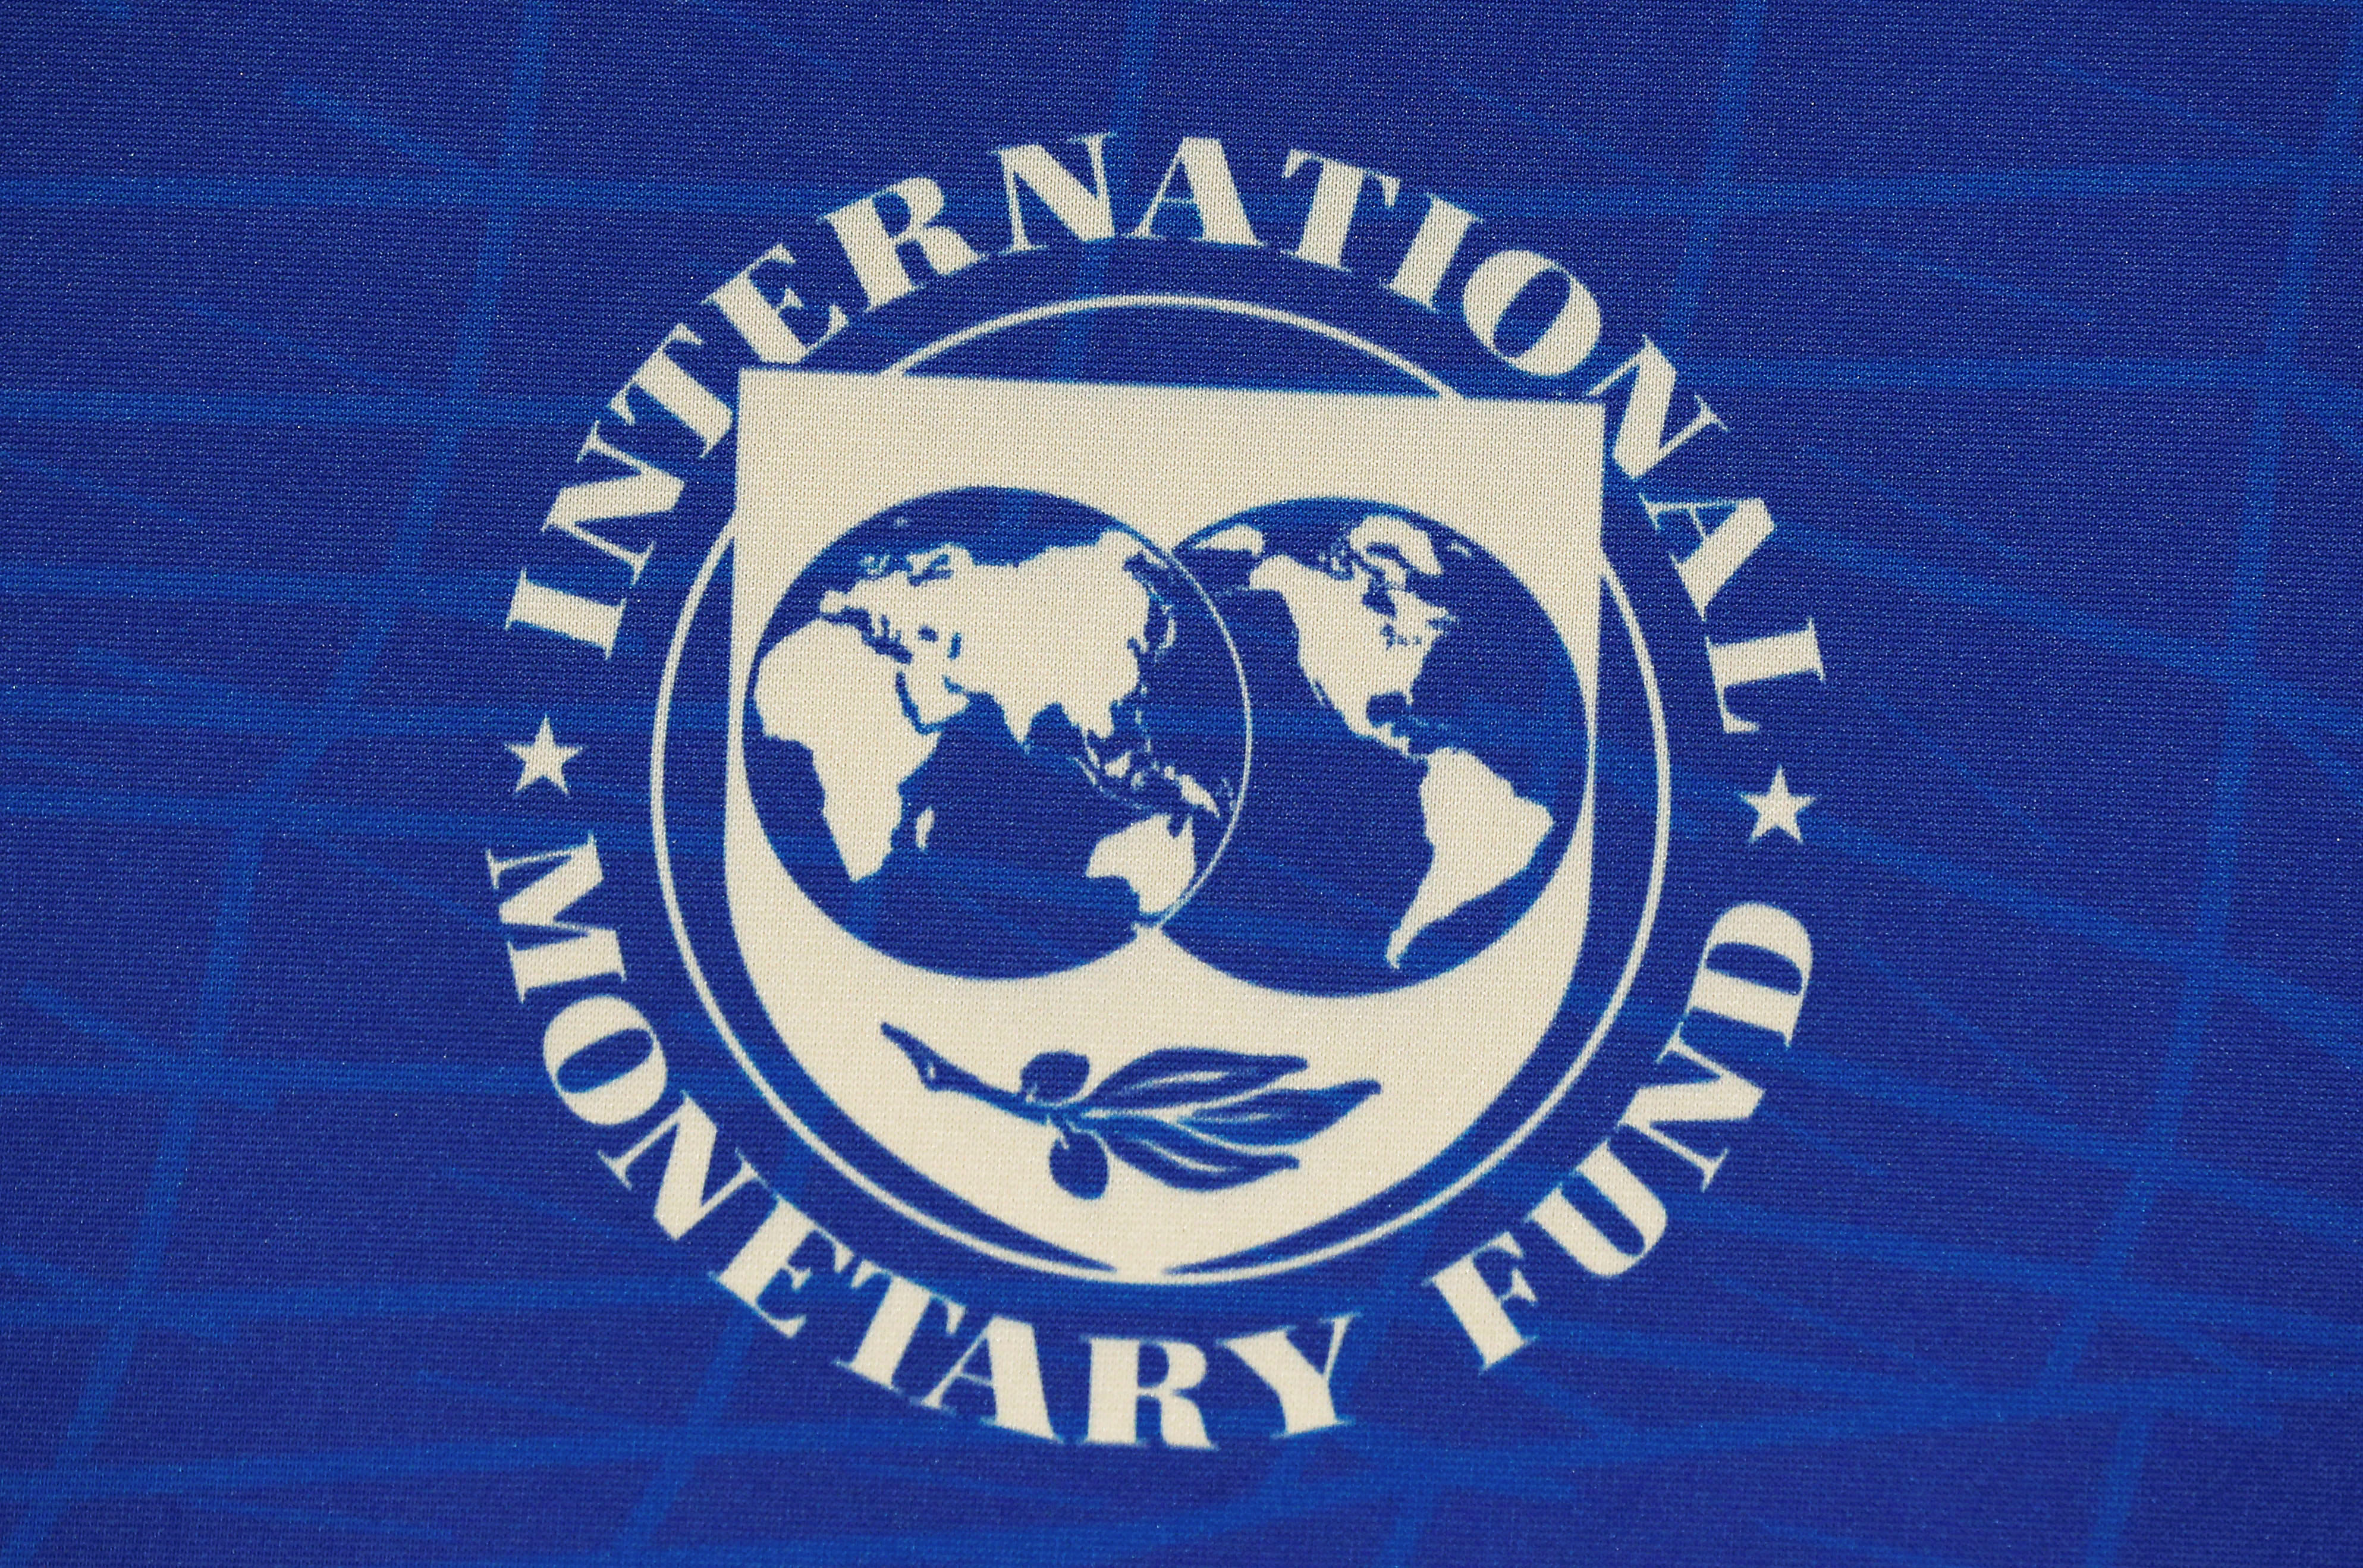 The logo of the International Monetary Fund (IMF), is seen during a news conference in Santiago